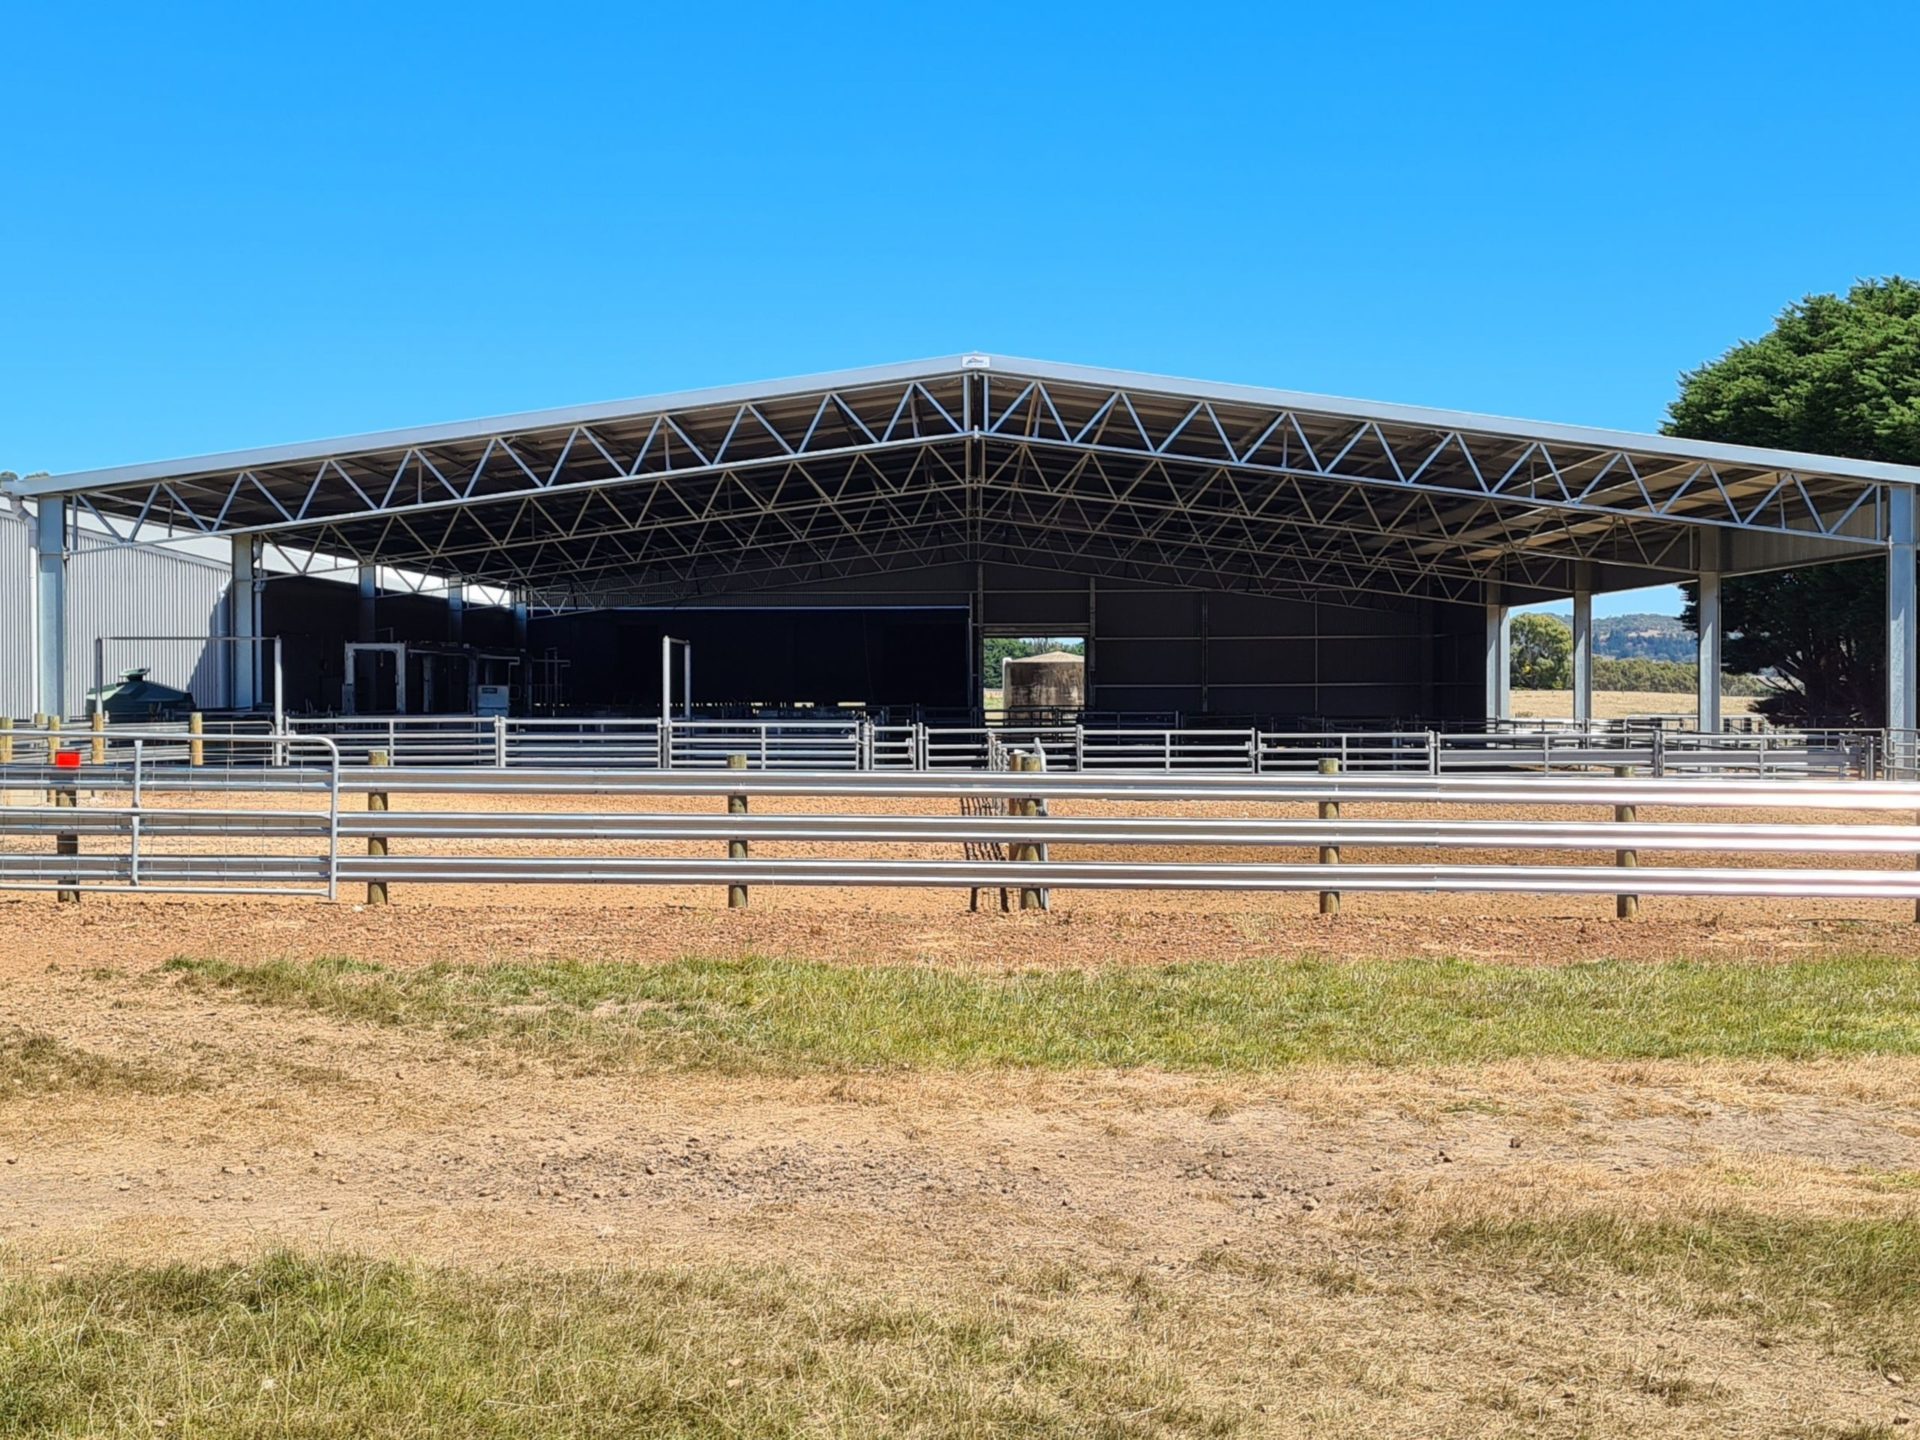 You are currently viewing 36m x 21m x 4.2m sheep yard cover